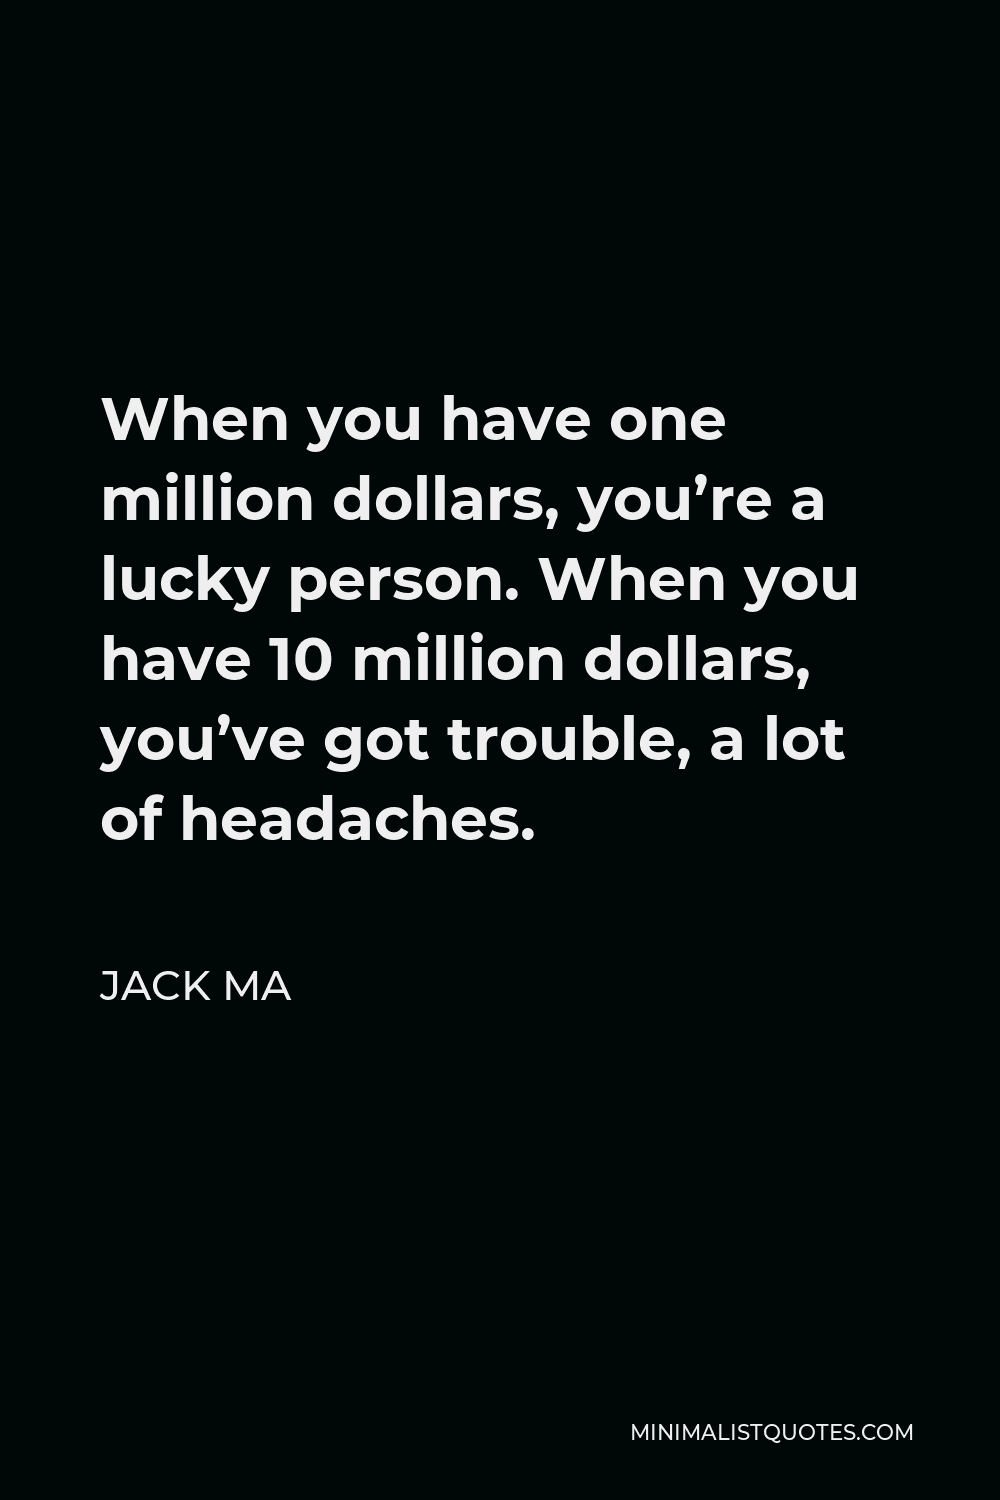 Jack Ma Quote - When you have one million dollars, you’re a lucky person. When you have 10 million dollars, you’ve got trouble, a lot of headaches.